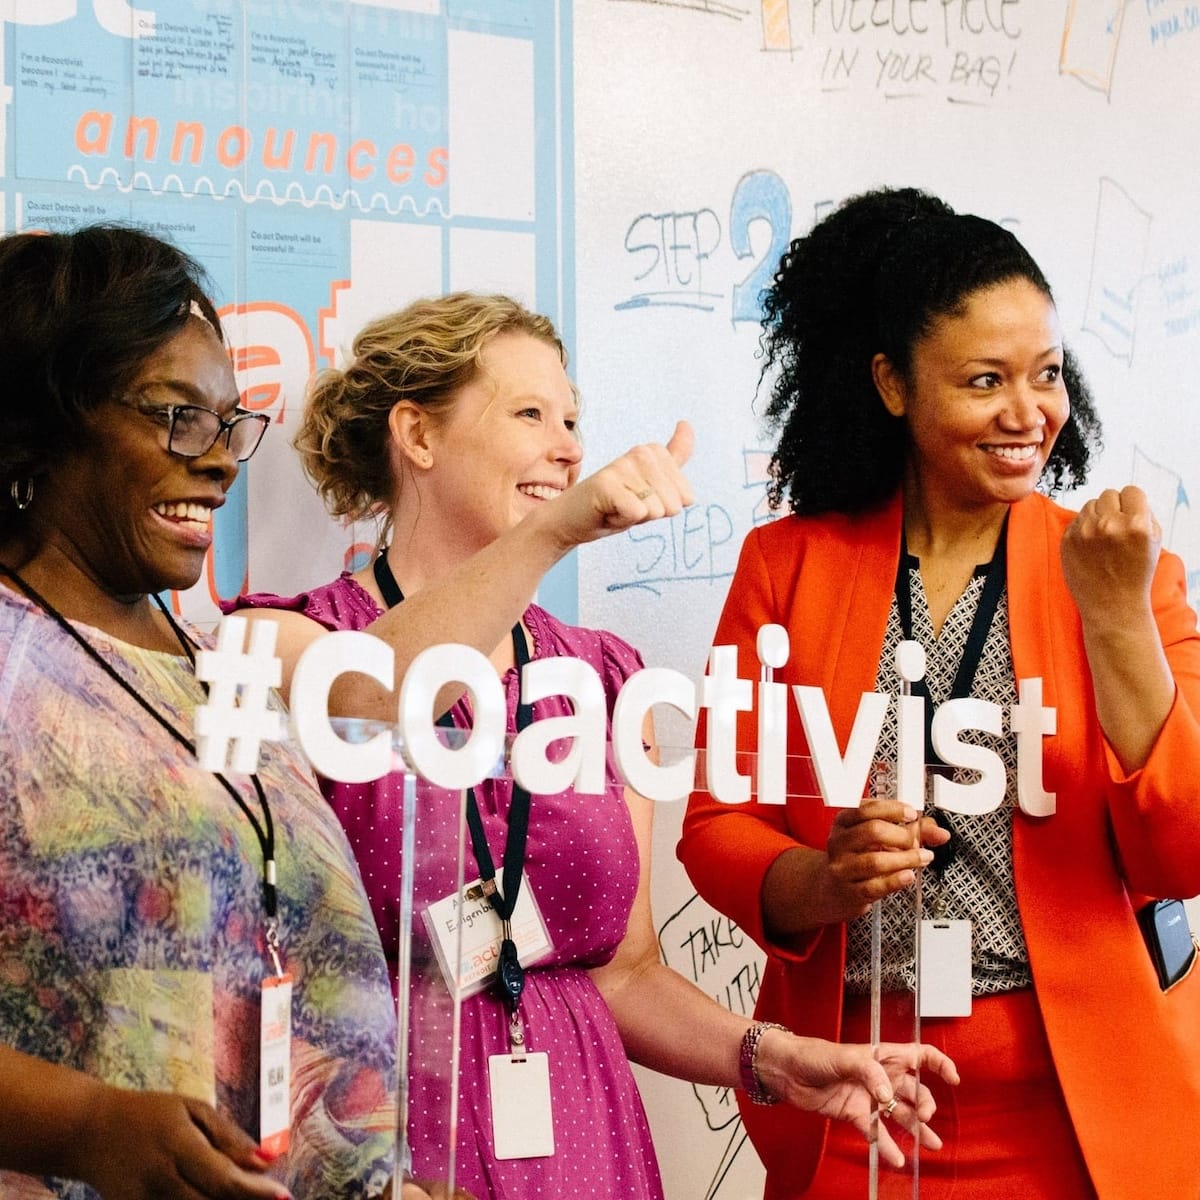 Three women standing next to each other and smiling in front of a logo that says "#coactivist" in white text color.